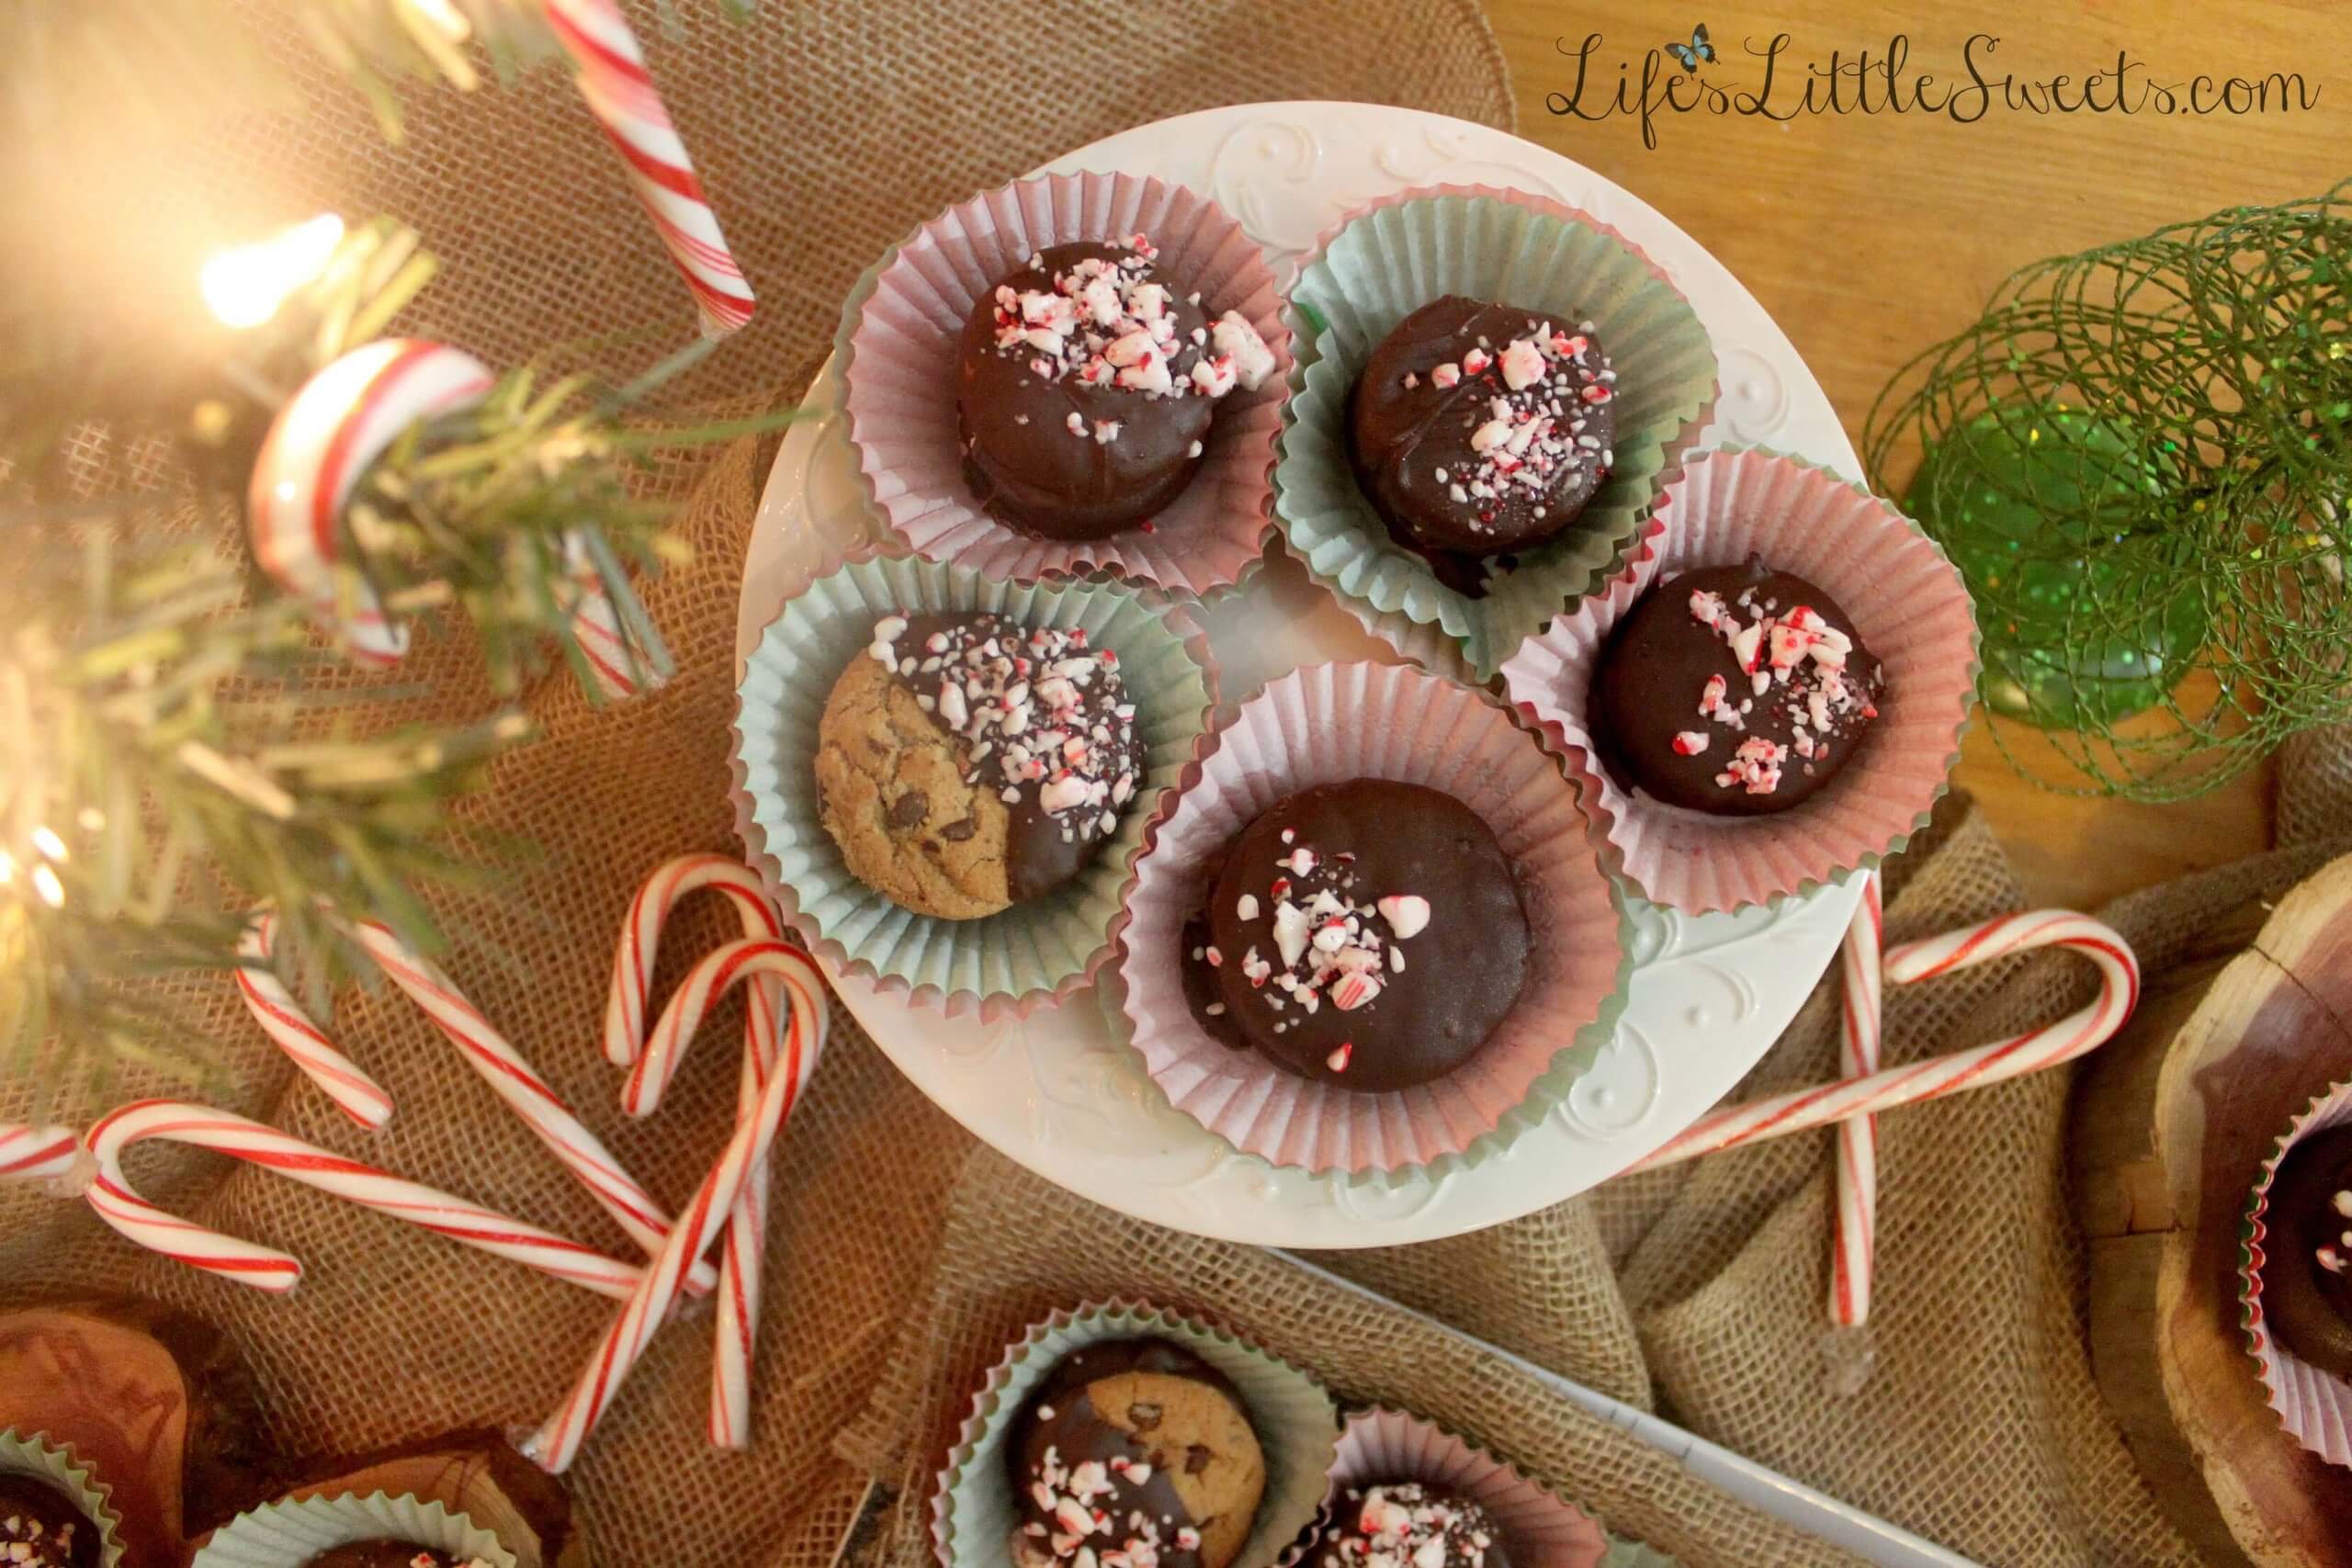 Mocha and Chocolate Covered Holiday Cookies have 5 ingredients (cookies, instant coffee, dark chocolate, semi-sweet chocolate & crushed candy canes), are quick to put together with only 3 steps and make entertaining with holiday flair look easy! #ad #GiftDeliciously #CollectiveBias